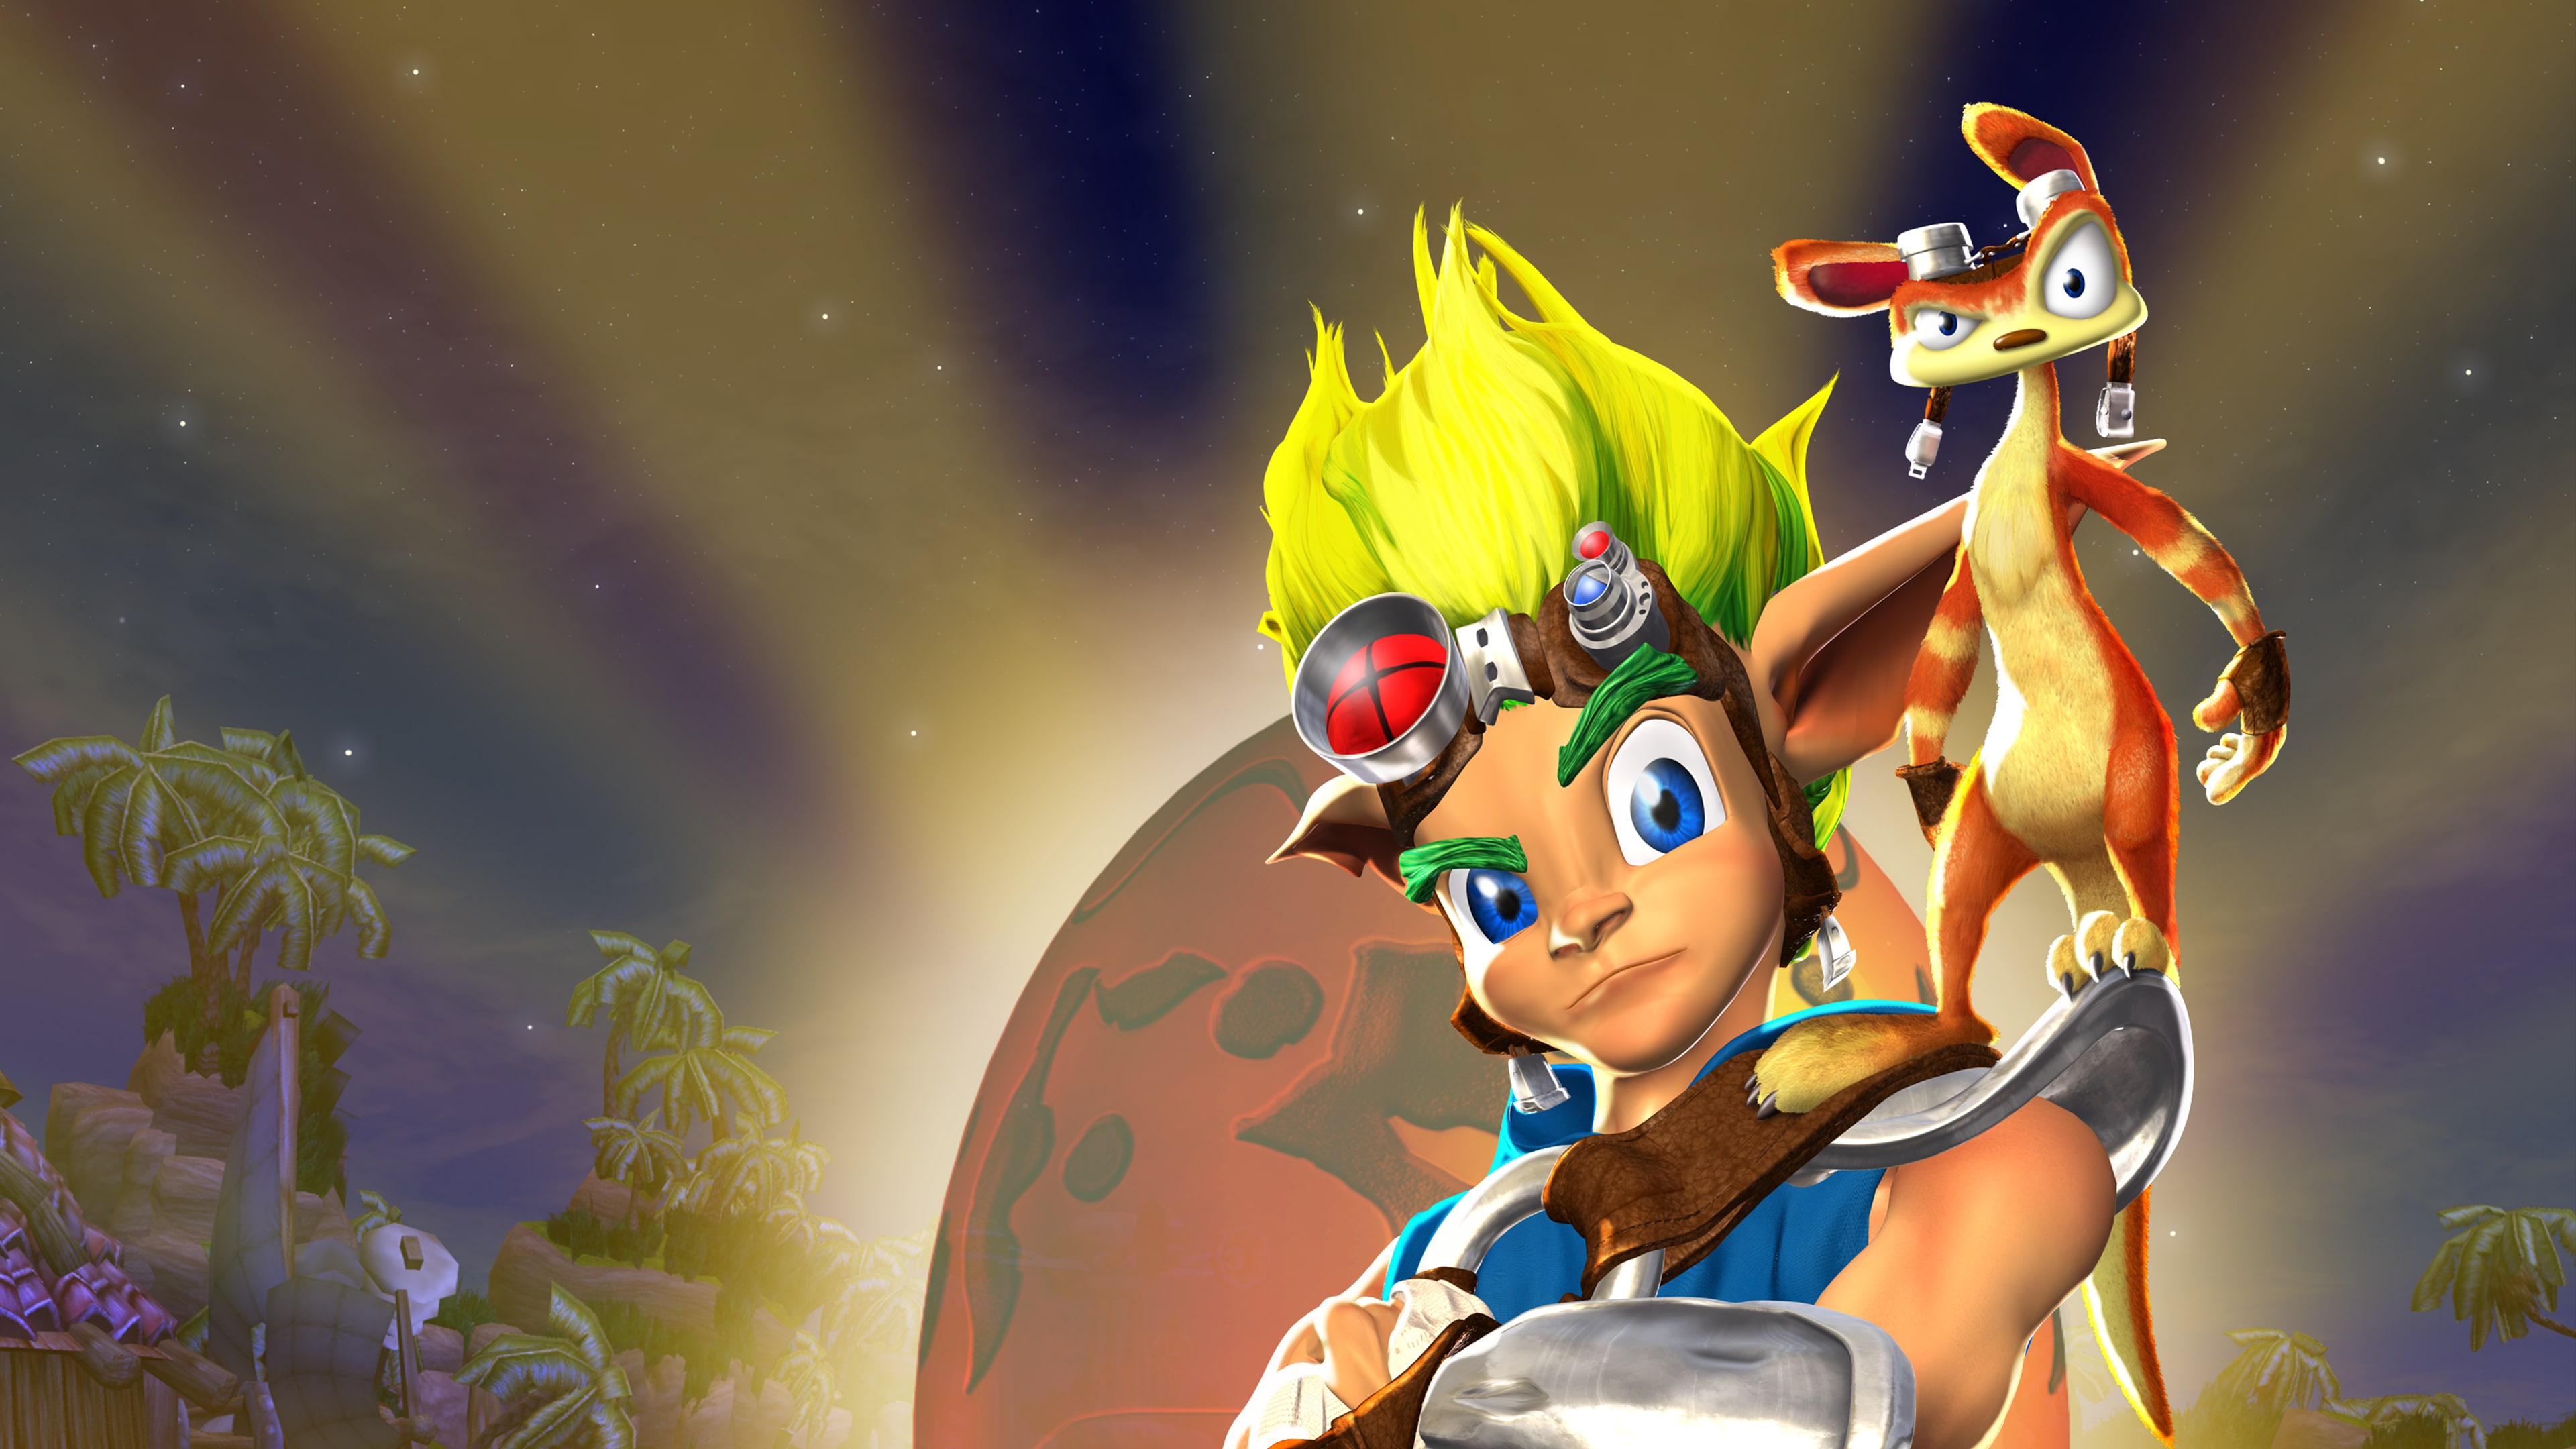 Jak and Daxter: The Precursor Legacy (영어판)